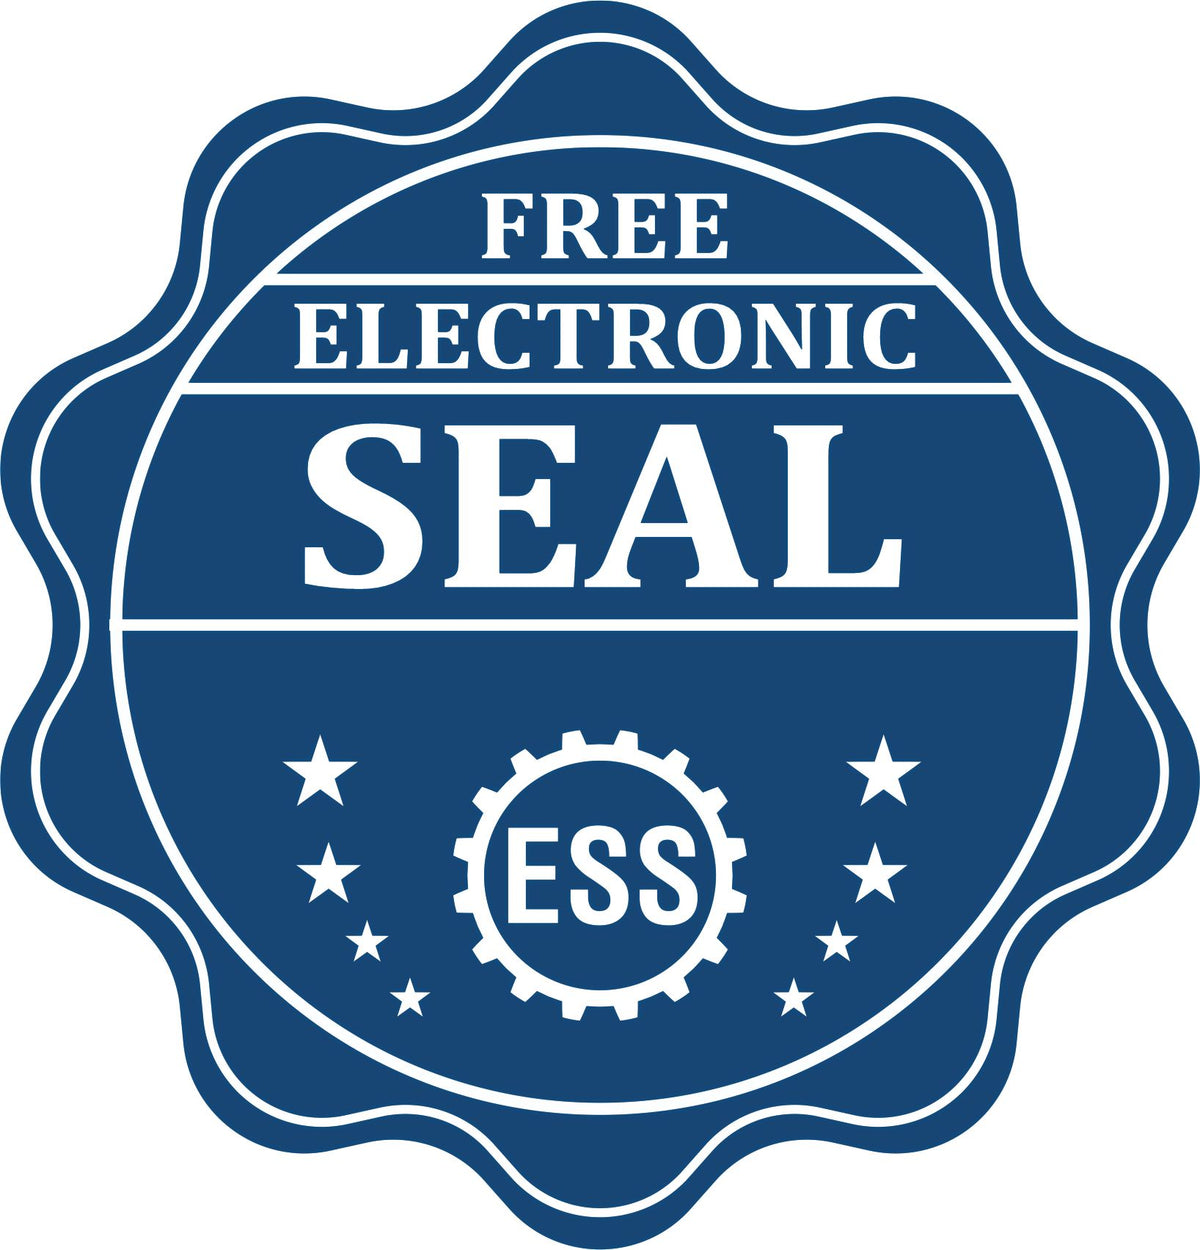 A badge showing a free electronic seal for the Soft Pocket Guam Landscape Architect Embosser with stars and the ESS gear on the emblem.